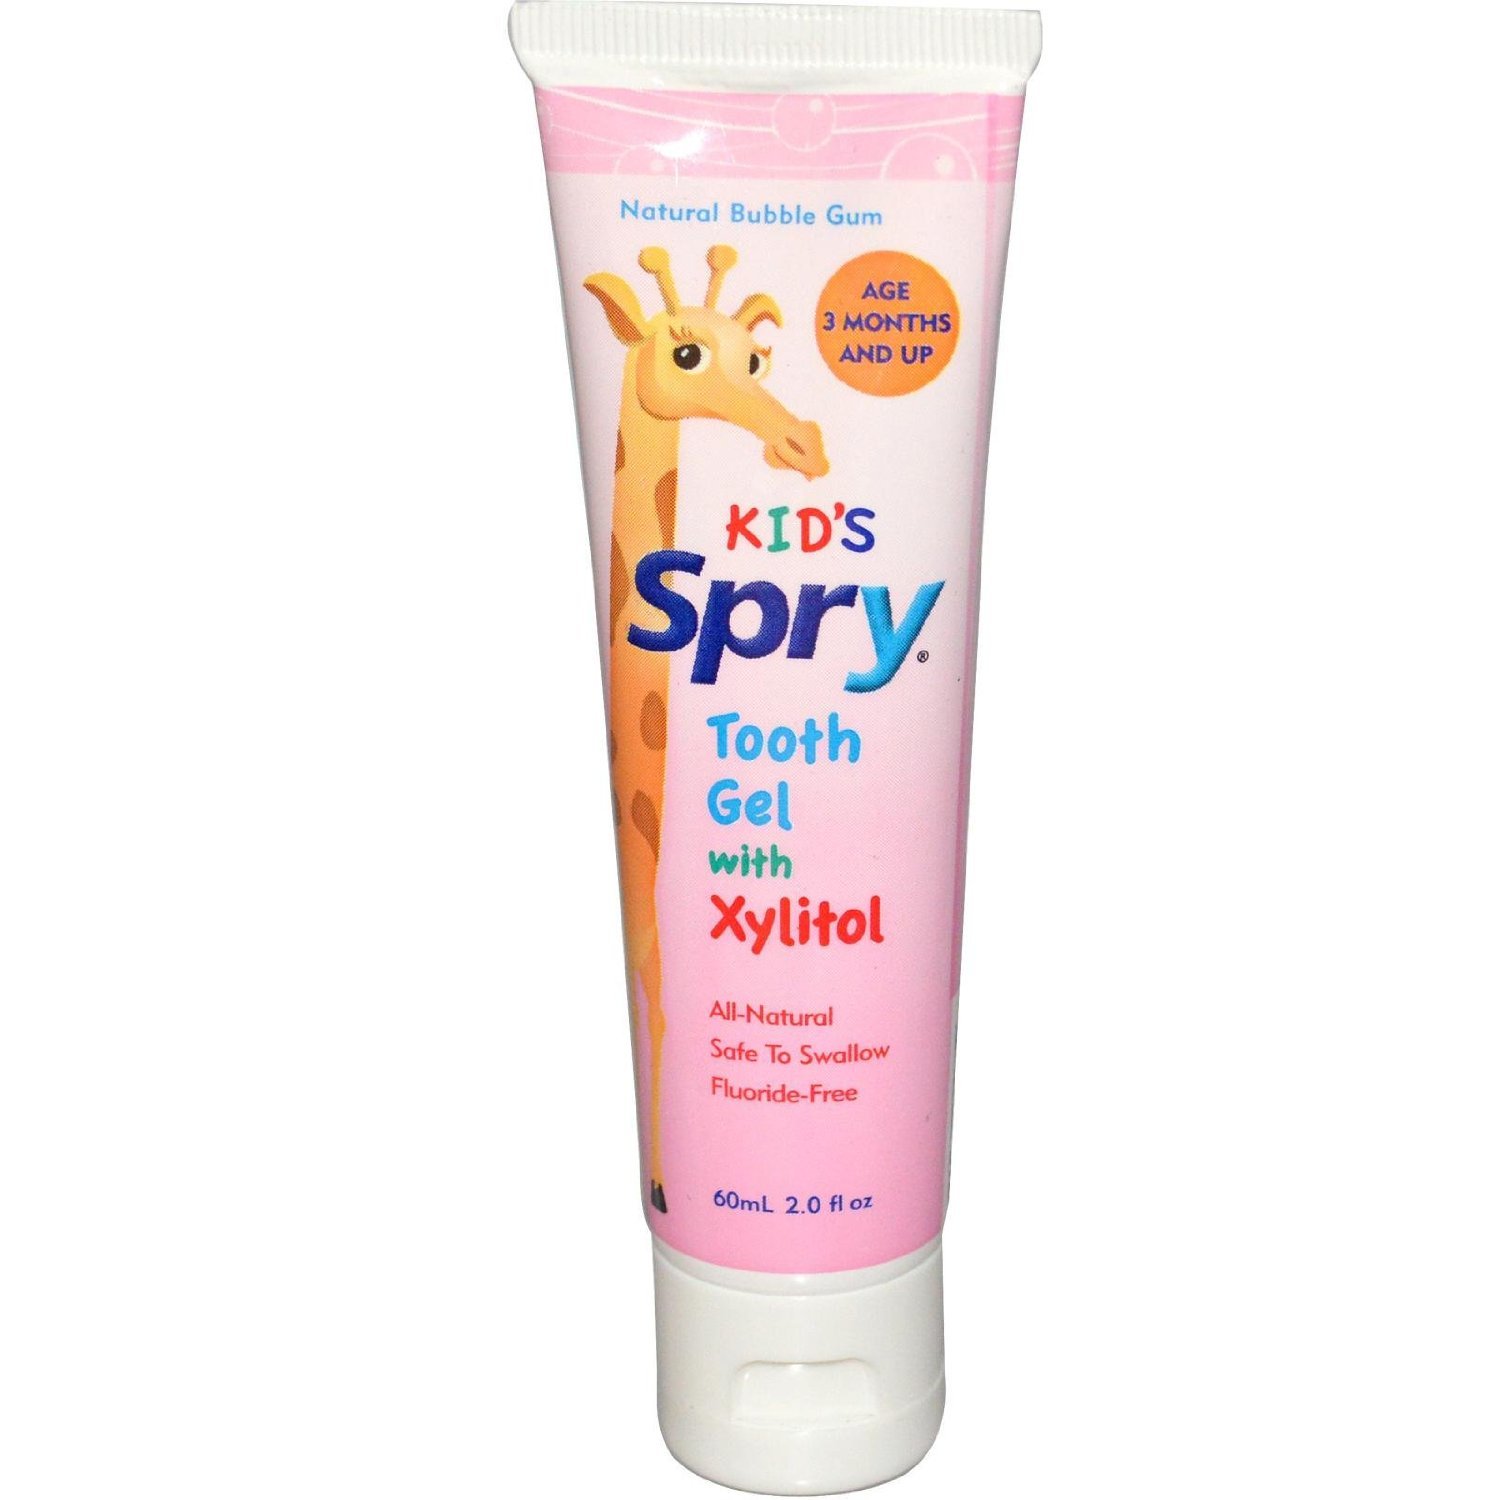 Spry Xylitol Baby Toothpaste, Natural Toddler Toothpaste, Fluoride Free Toothpaste for Kids, Xylitol Toothpaste for Kids Age 3 Months and Up, Tooth Gel Bubble Gum 2 Fl Oz (Pack of 2)